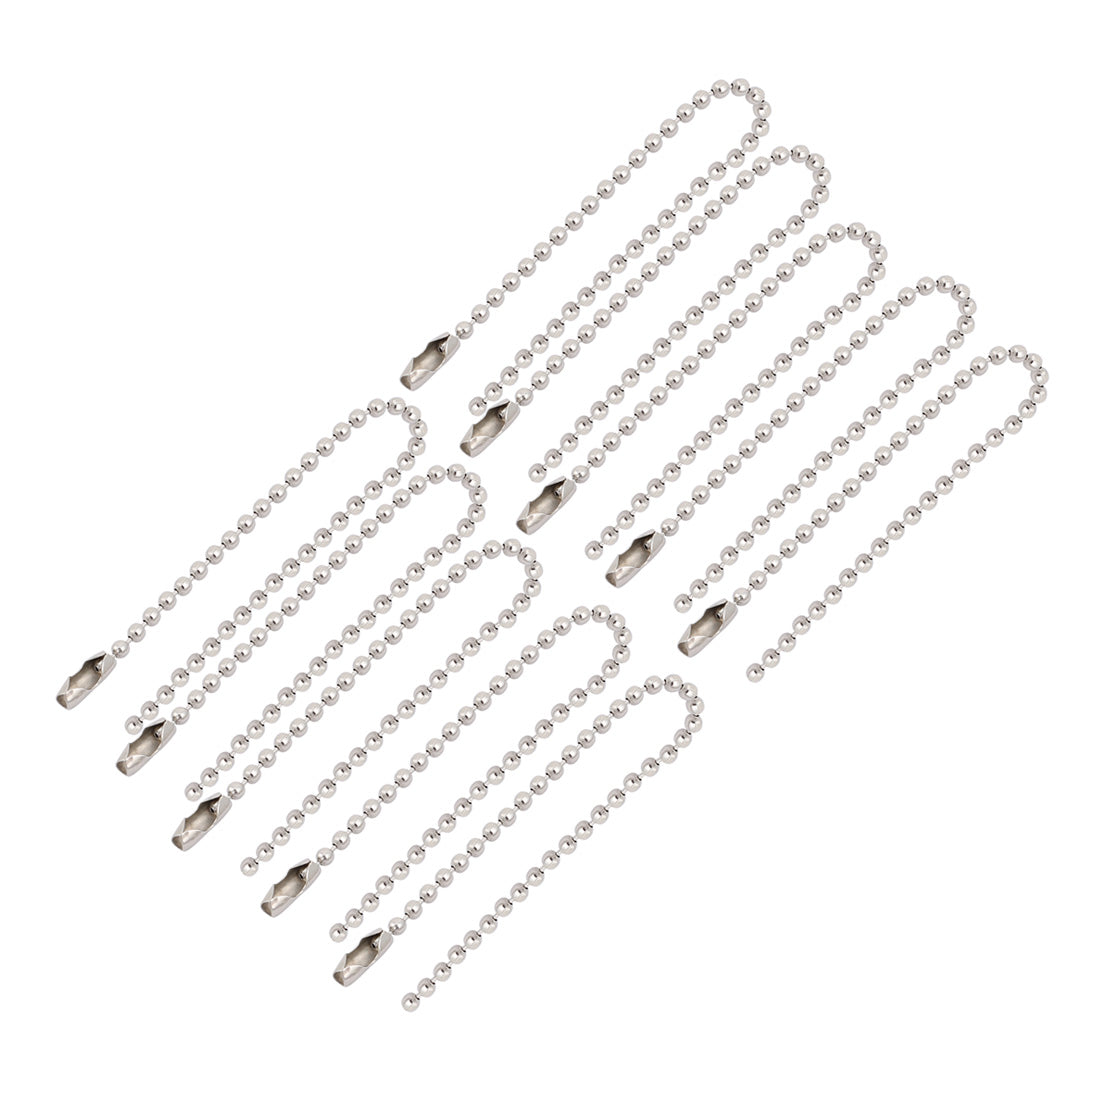 uxcell Uxcell Stainless Steel Bead Ball Chain Keychain 2.4mm by 6 Inches 10pcs